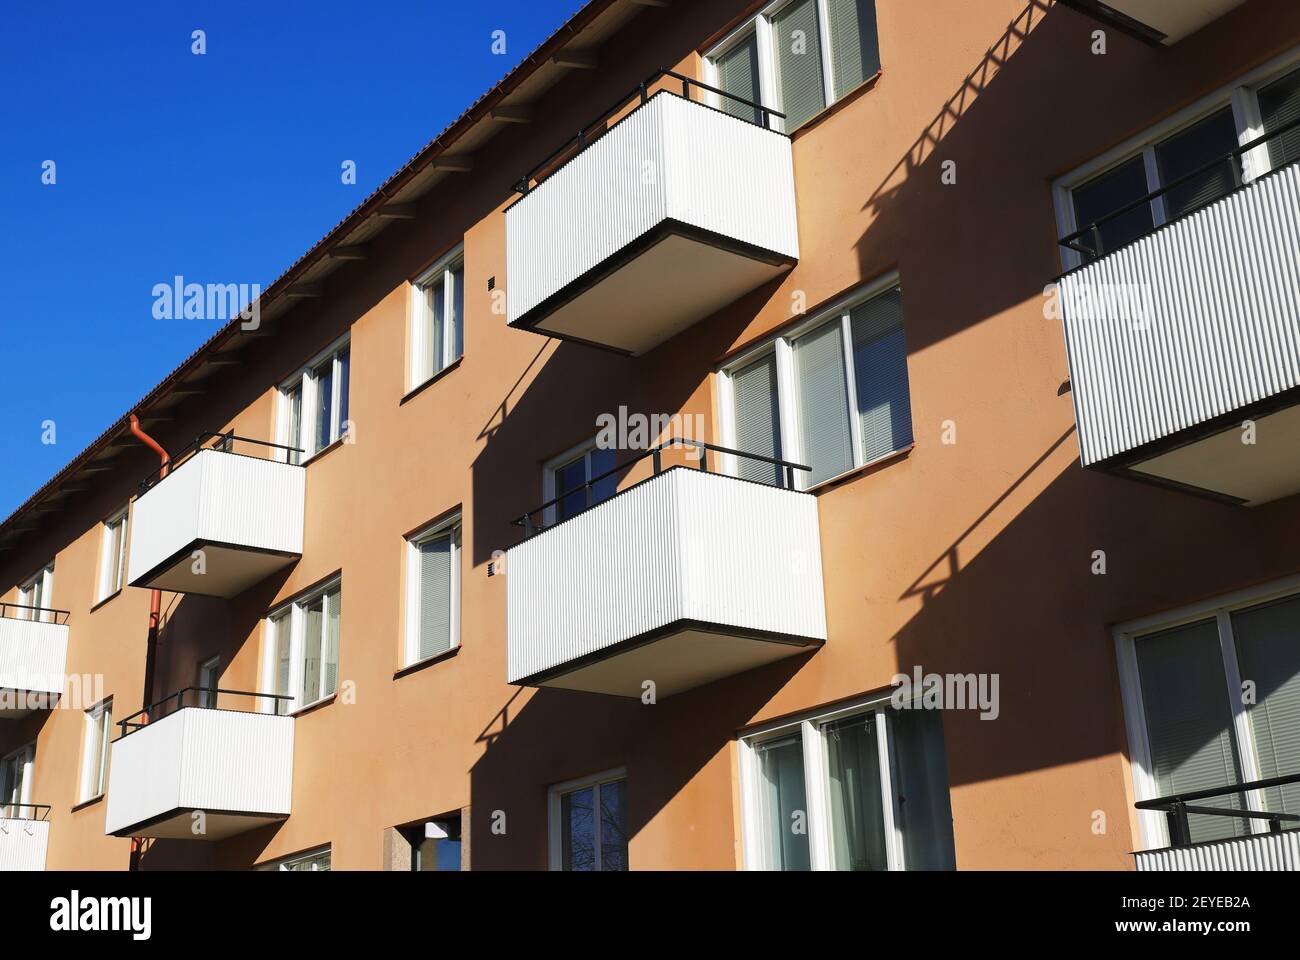 Multi-family house with apartments on three floors built in the 1940s. Stock Photo